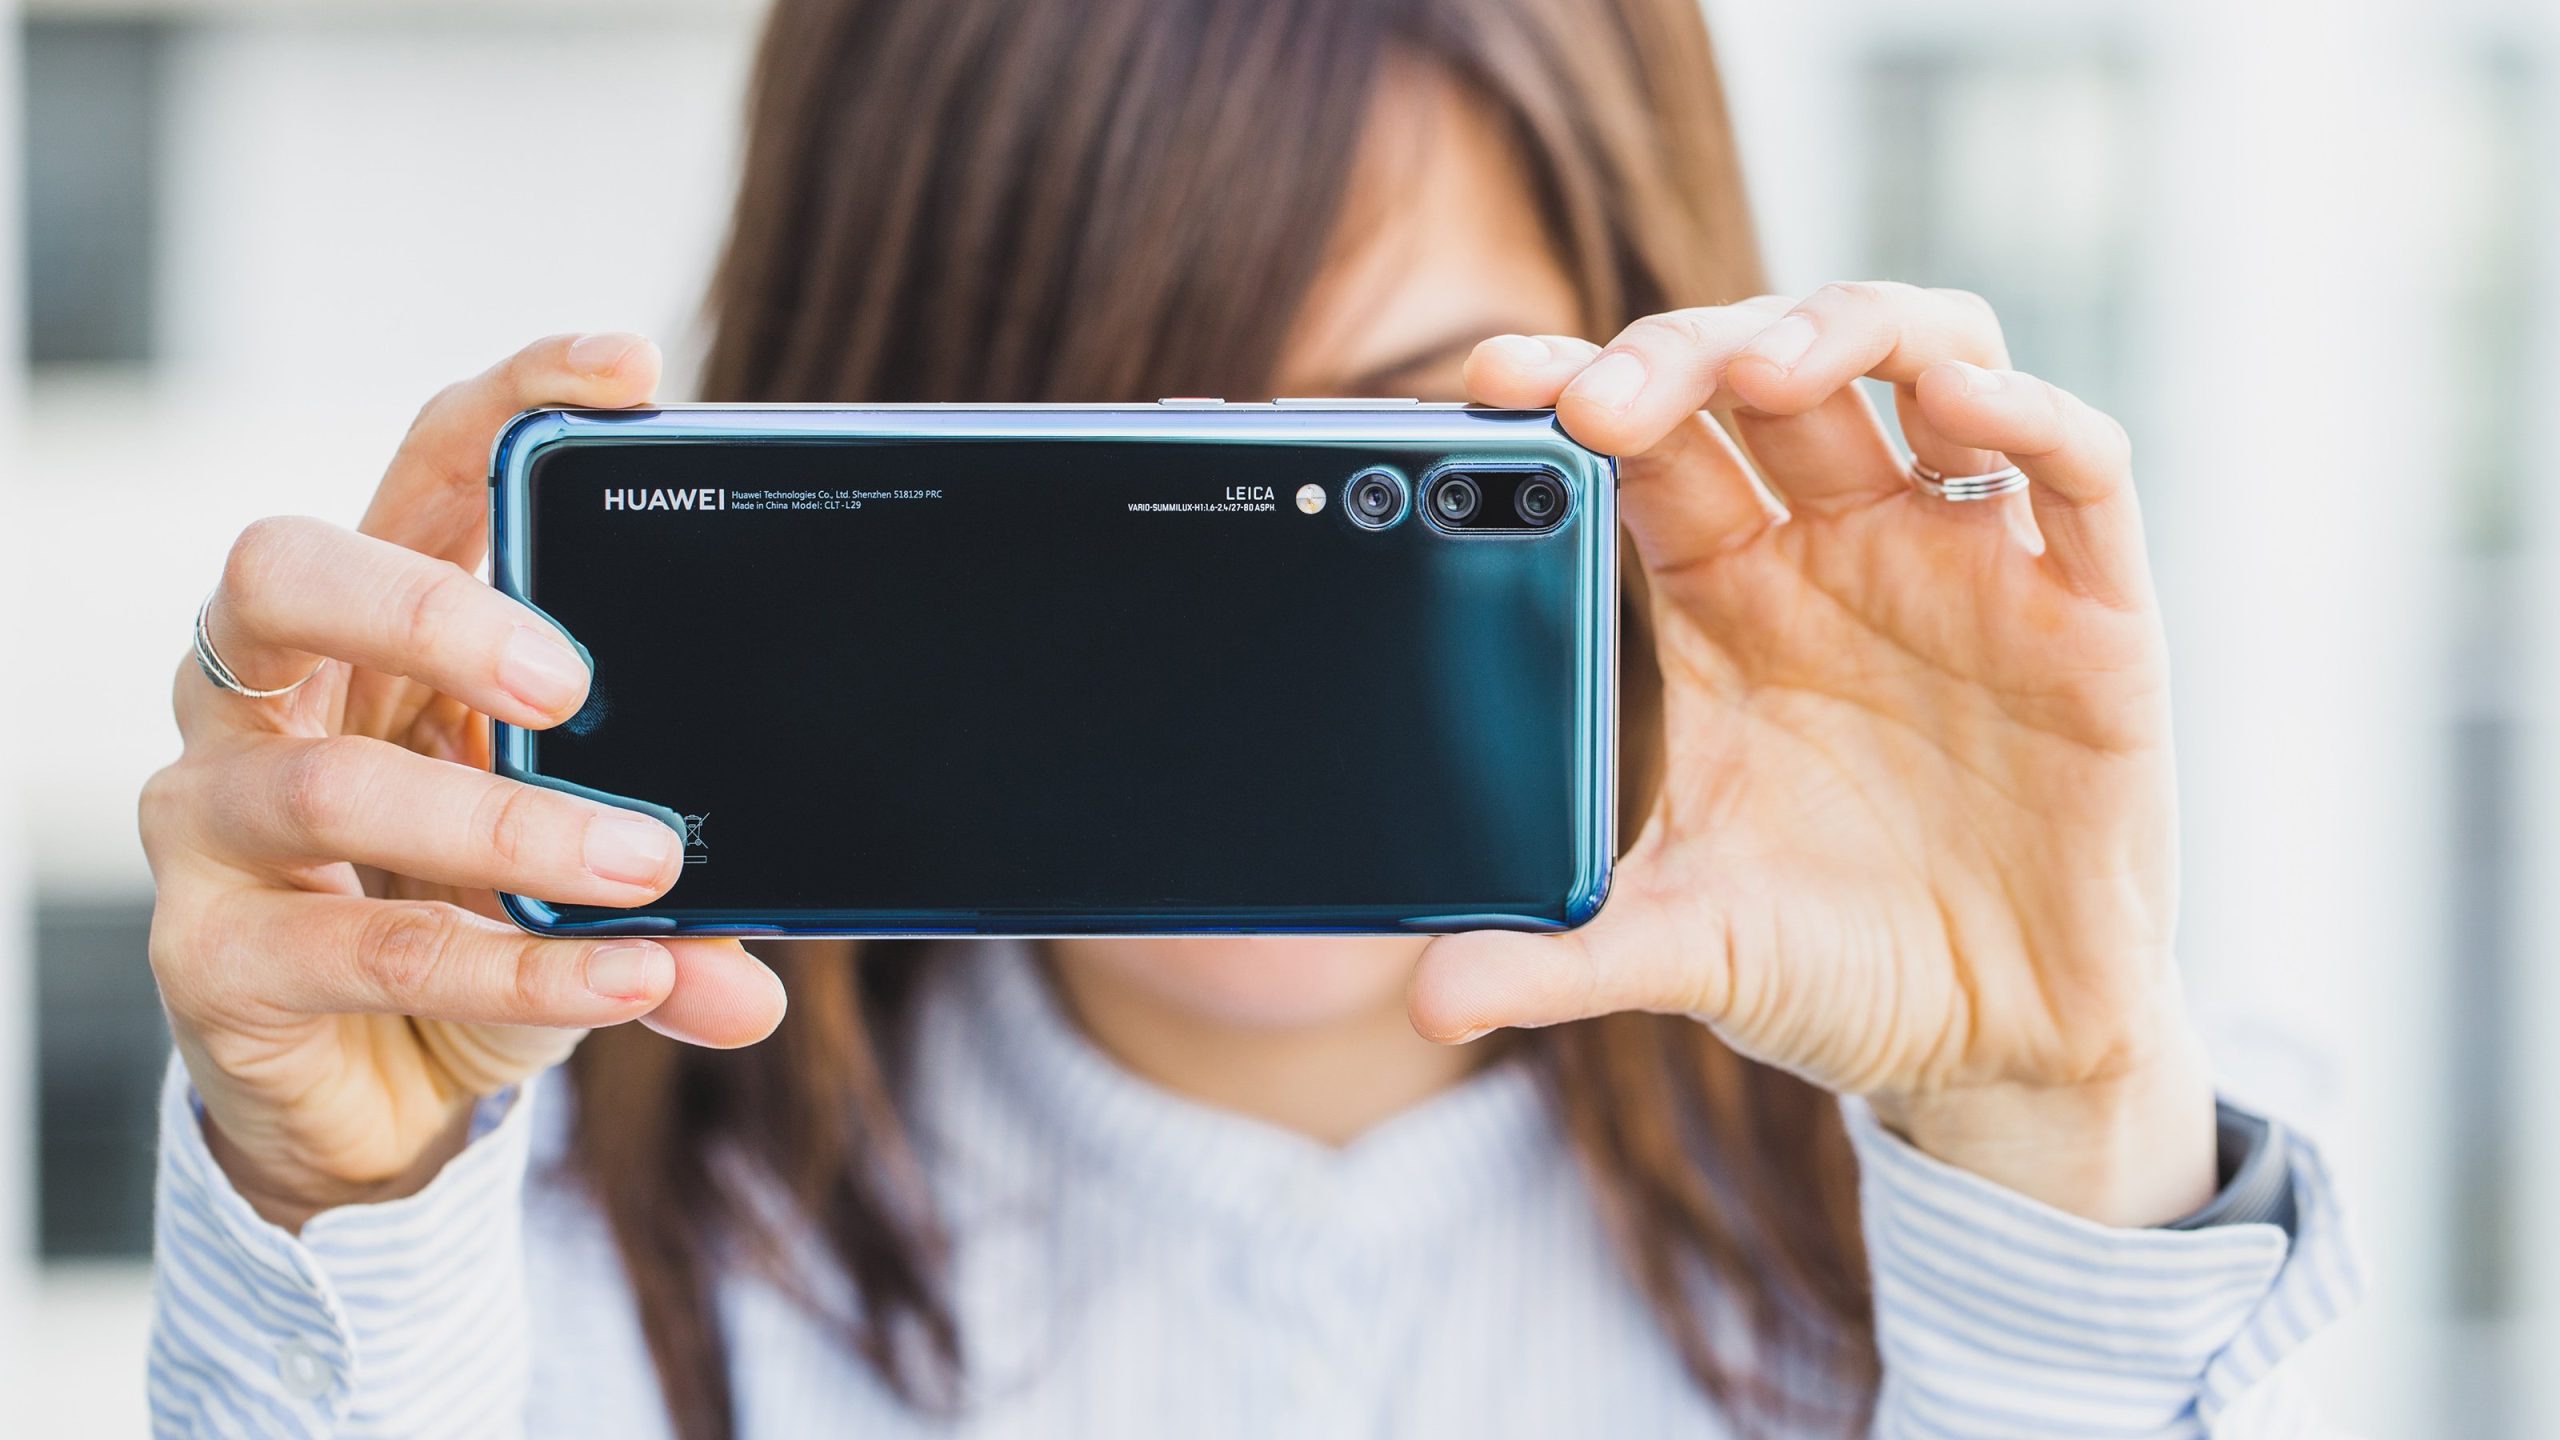 10 Tips on How to take Great Photos With Your Android Phone